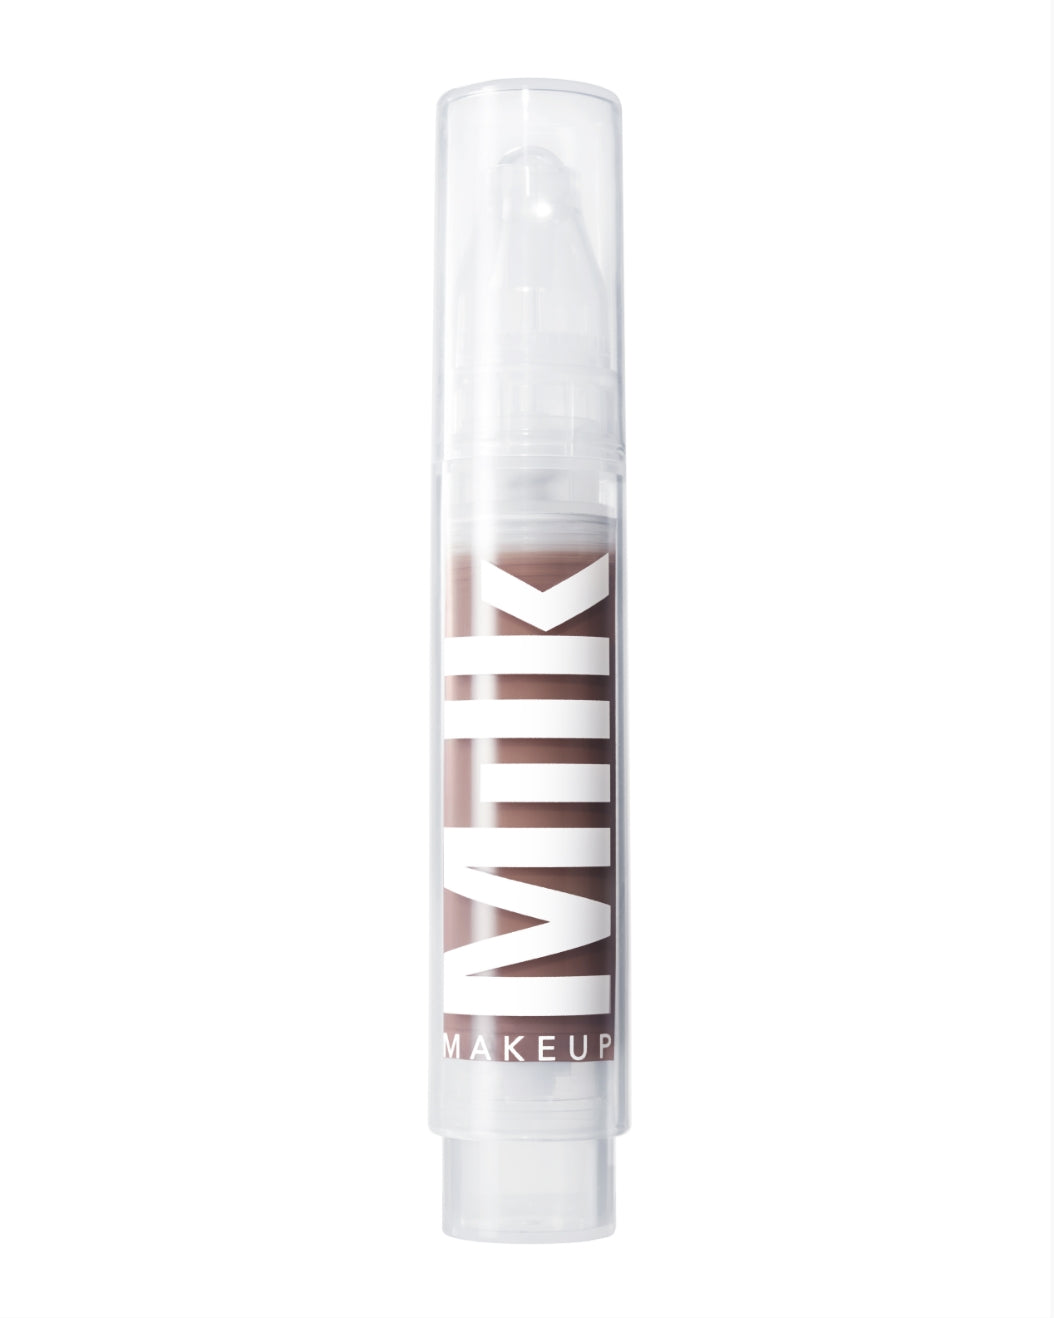 Product shot of a tube of Milk Makeup Sunshine Skin Tint against a white background.